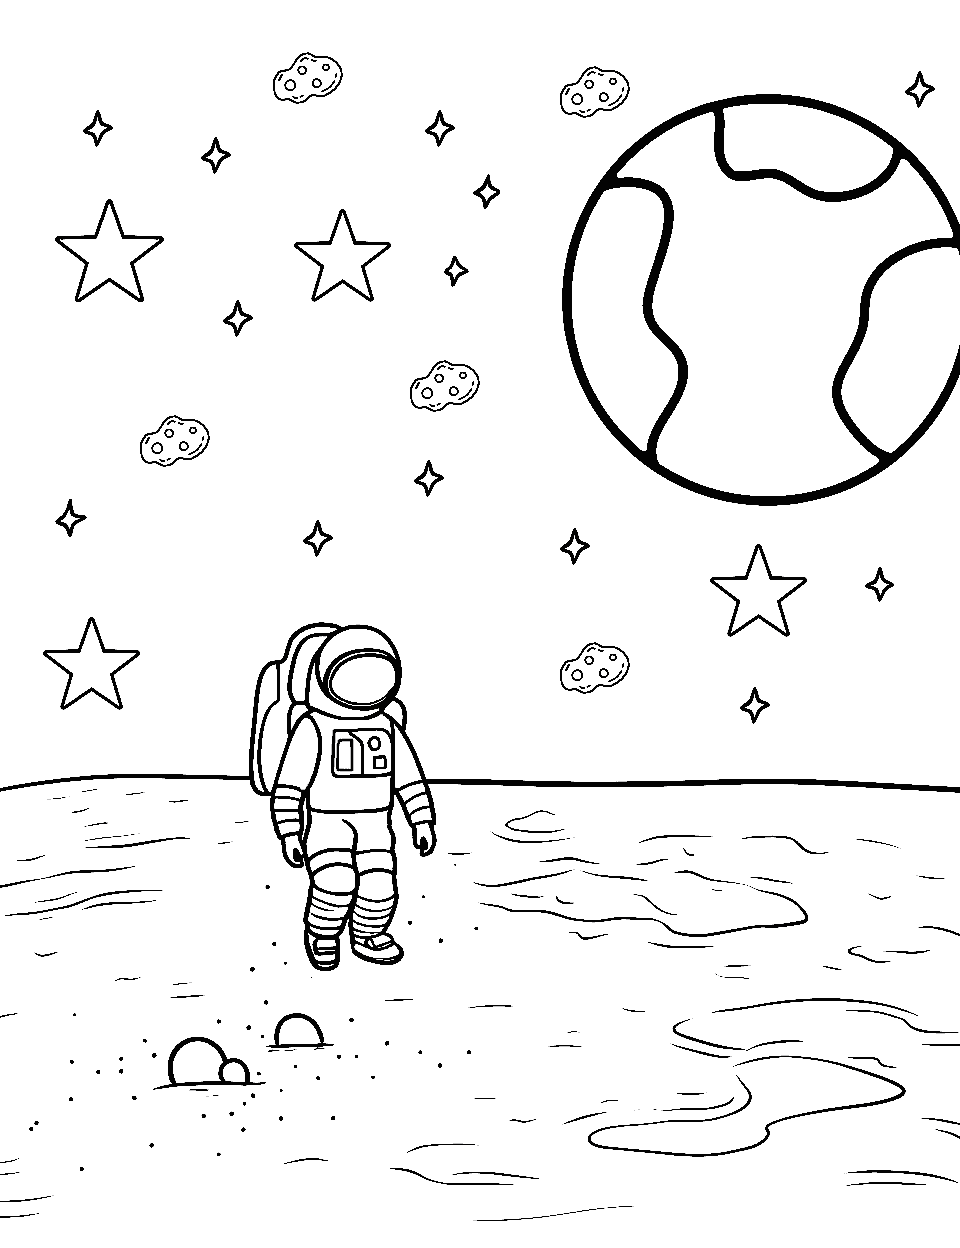 Walking on the Moon Coloring Page - An astronaut taking steps on the moon’s surface.